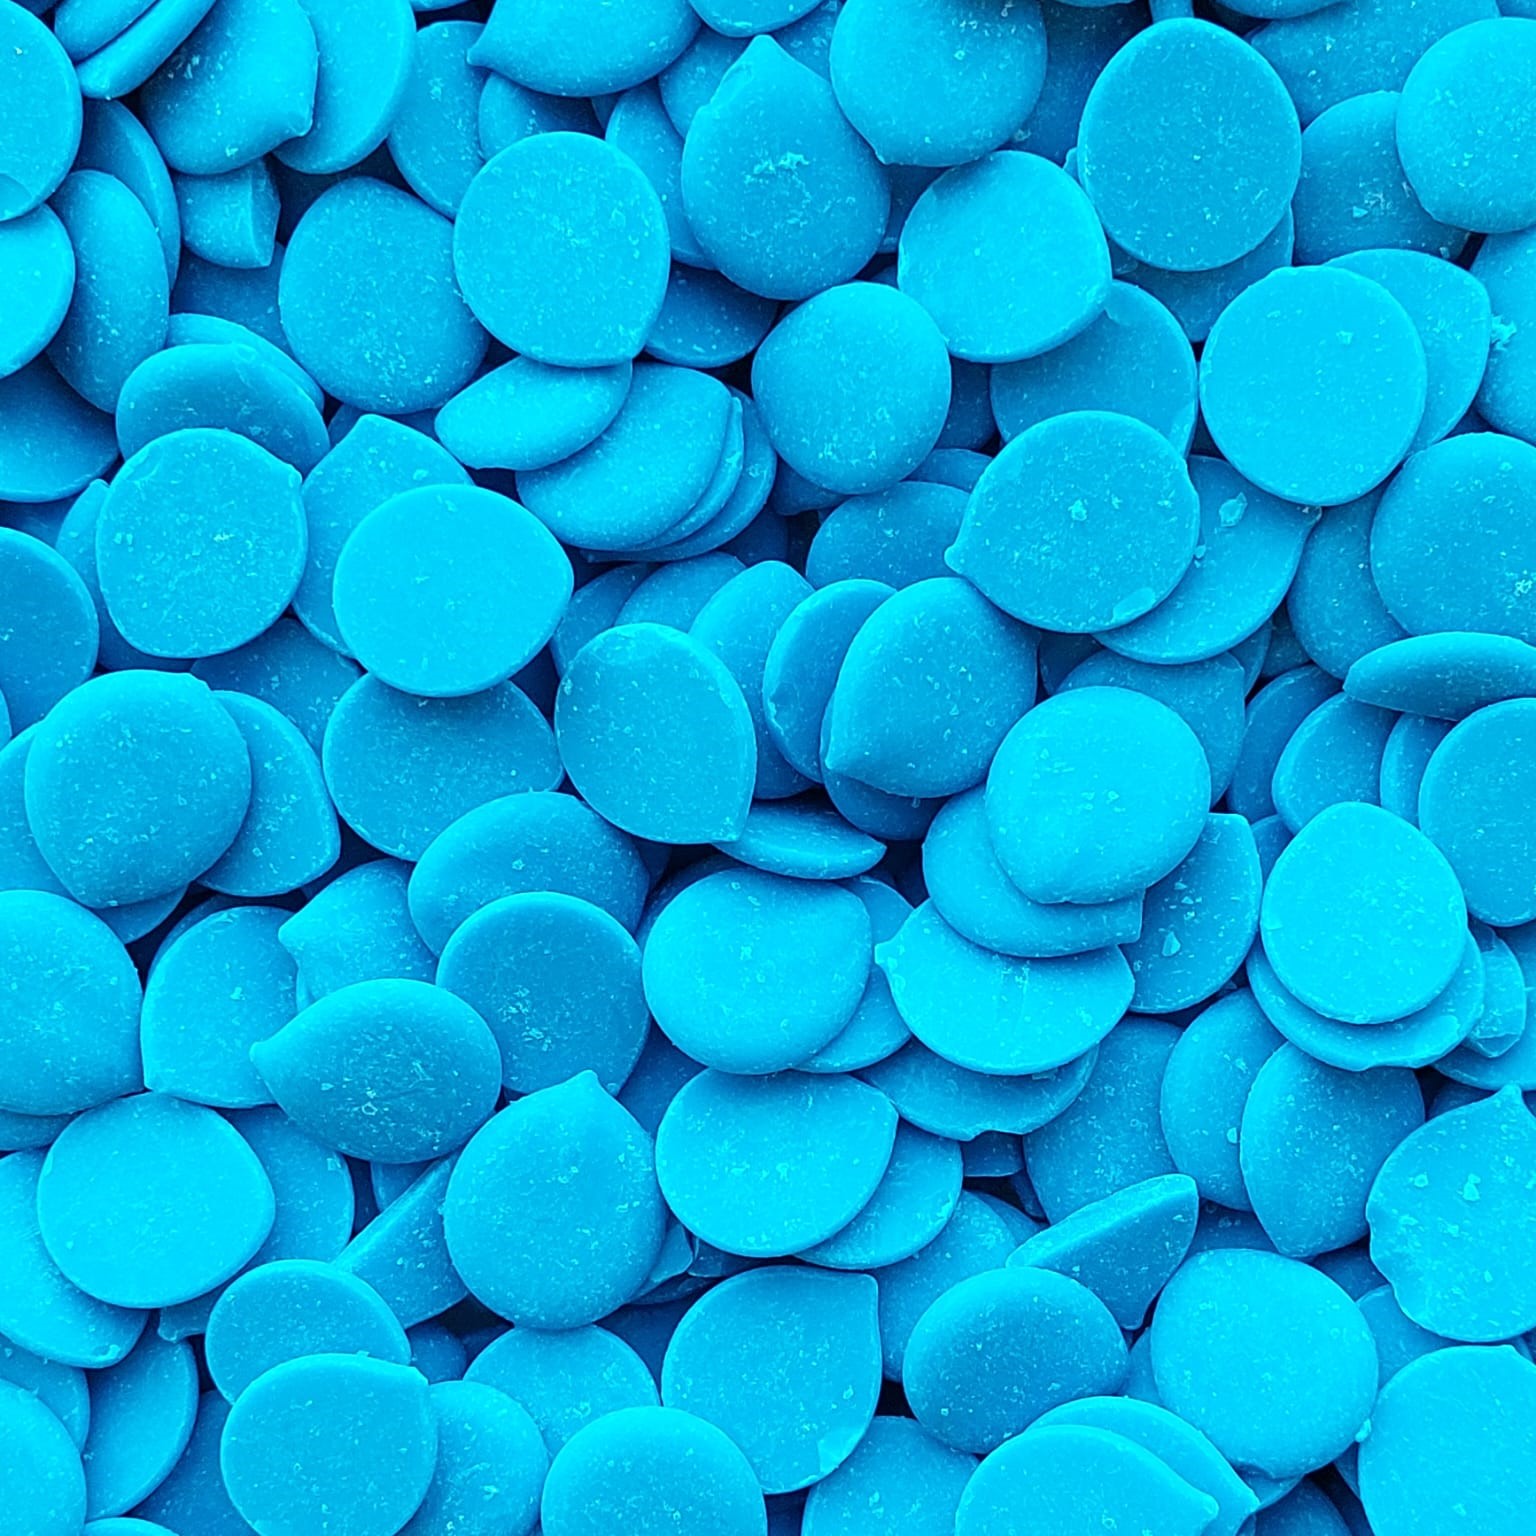 Candy drops blue 330g